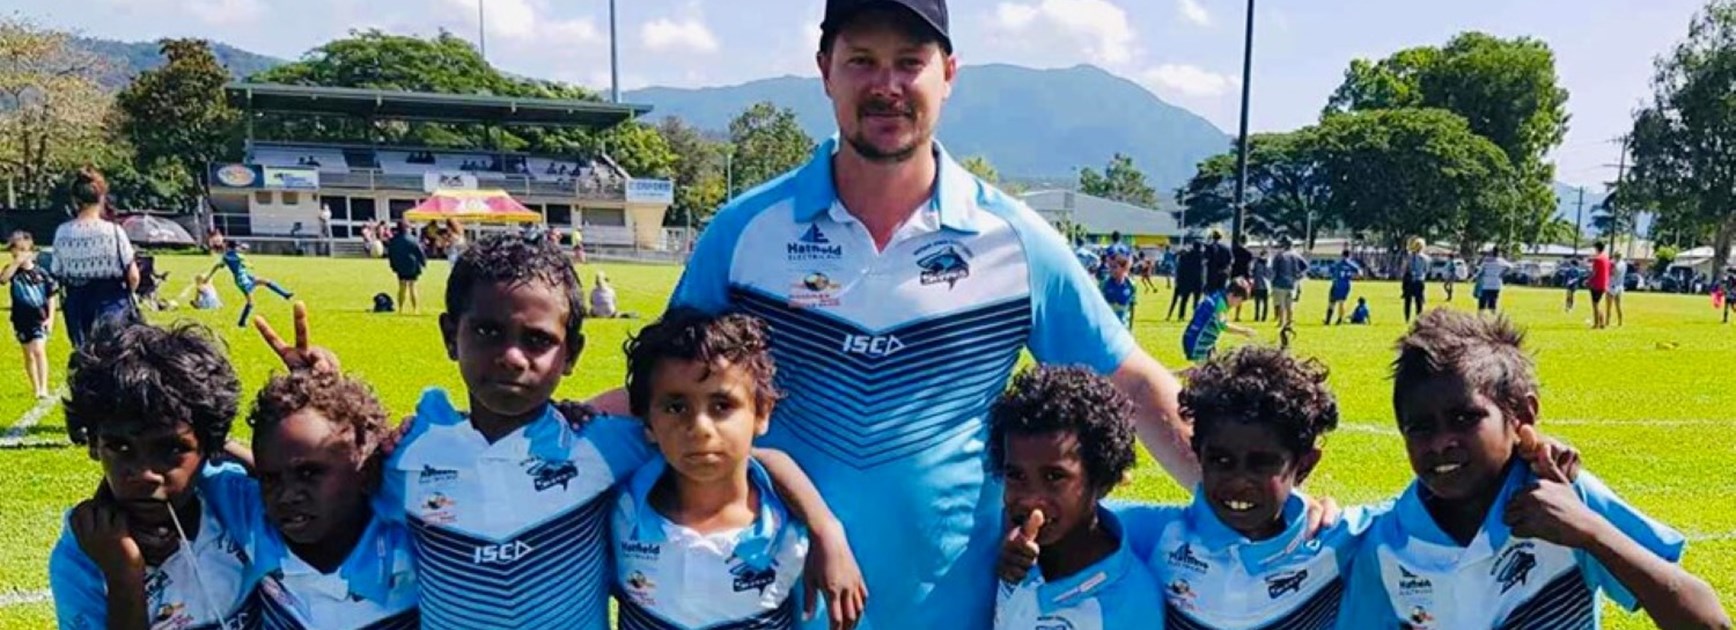 Coen youngsters taken under wing of Mossman Sharks club